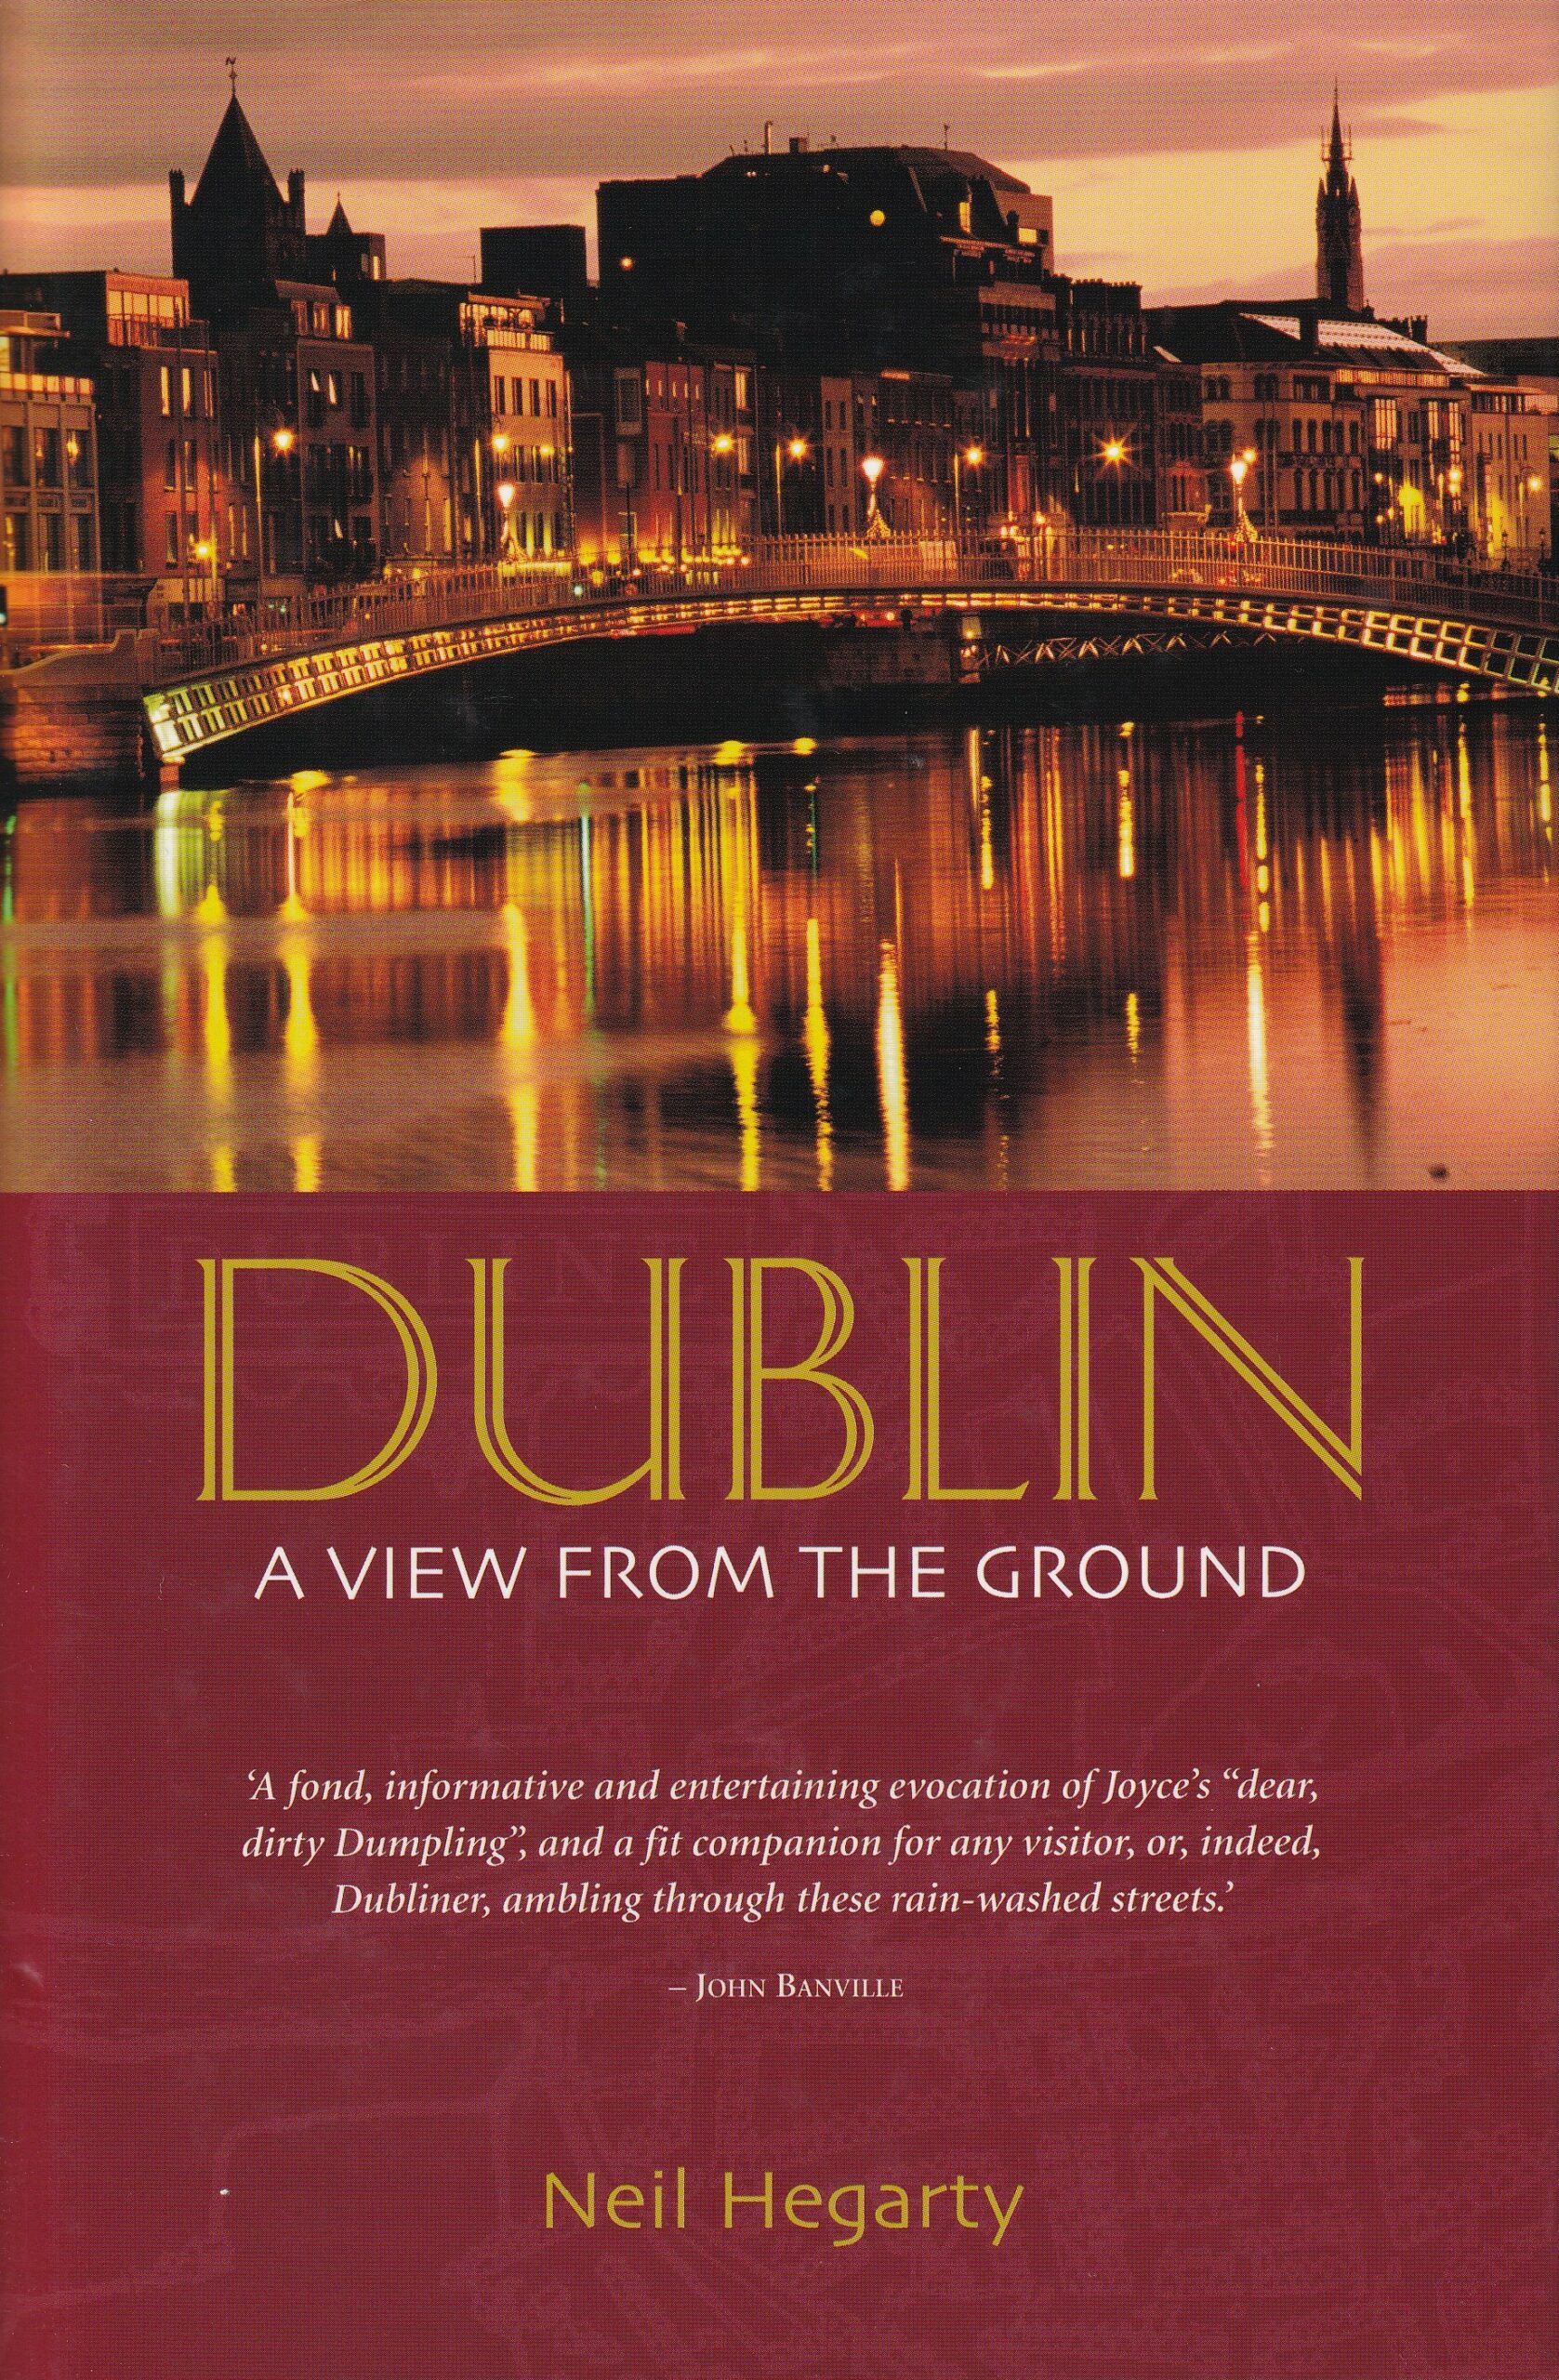 Dublin: A View from the Ground by Neil Hegarty